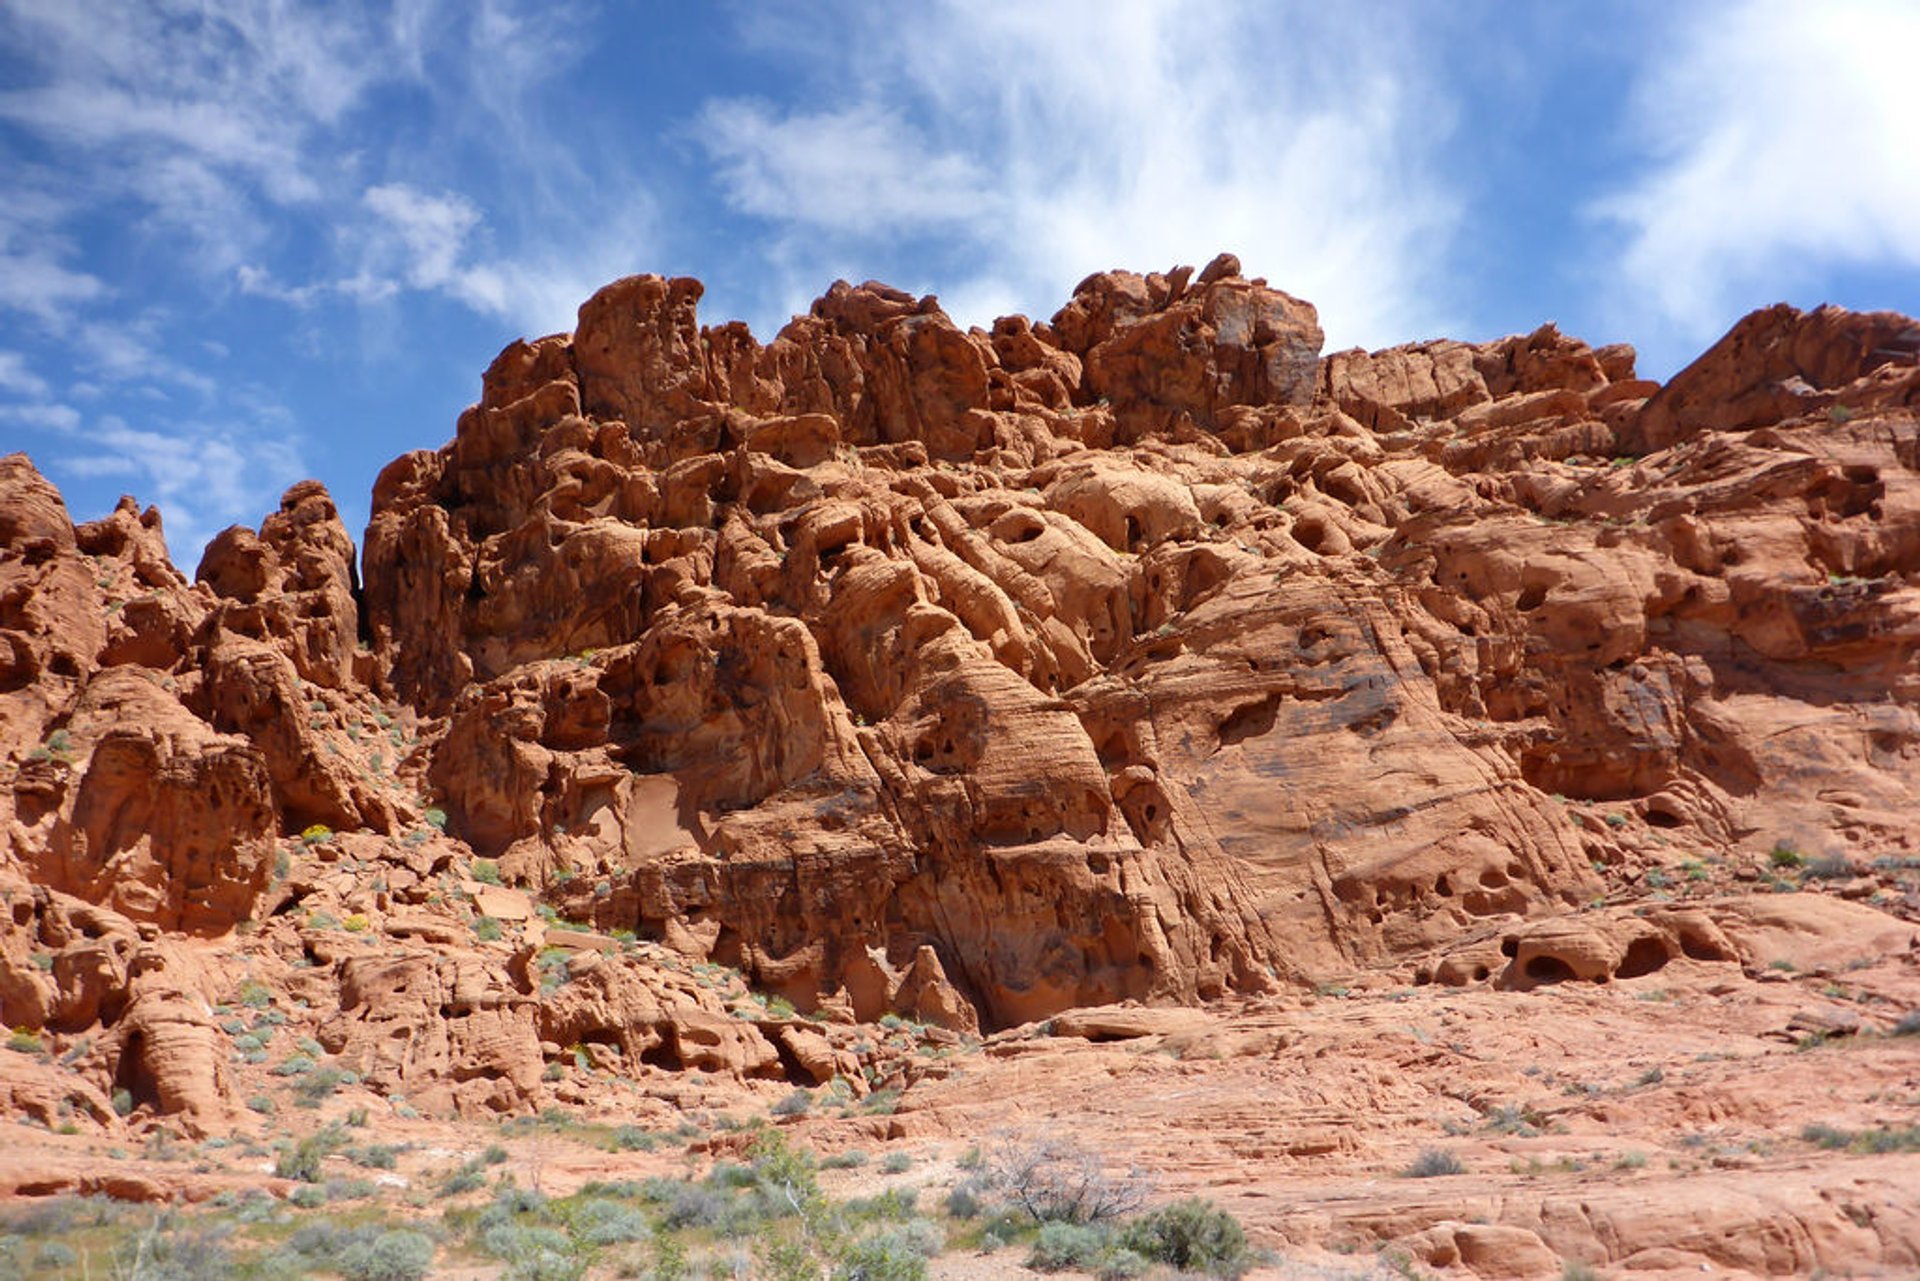 Hiking in the Valley of Fire